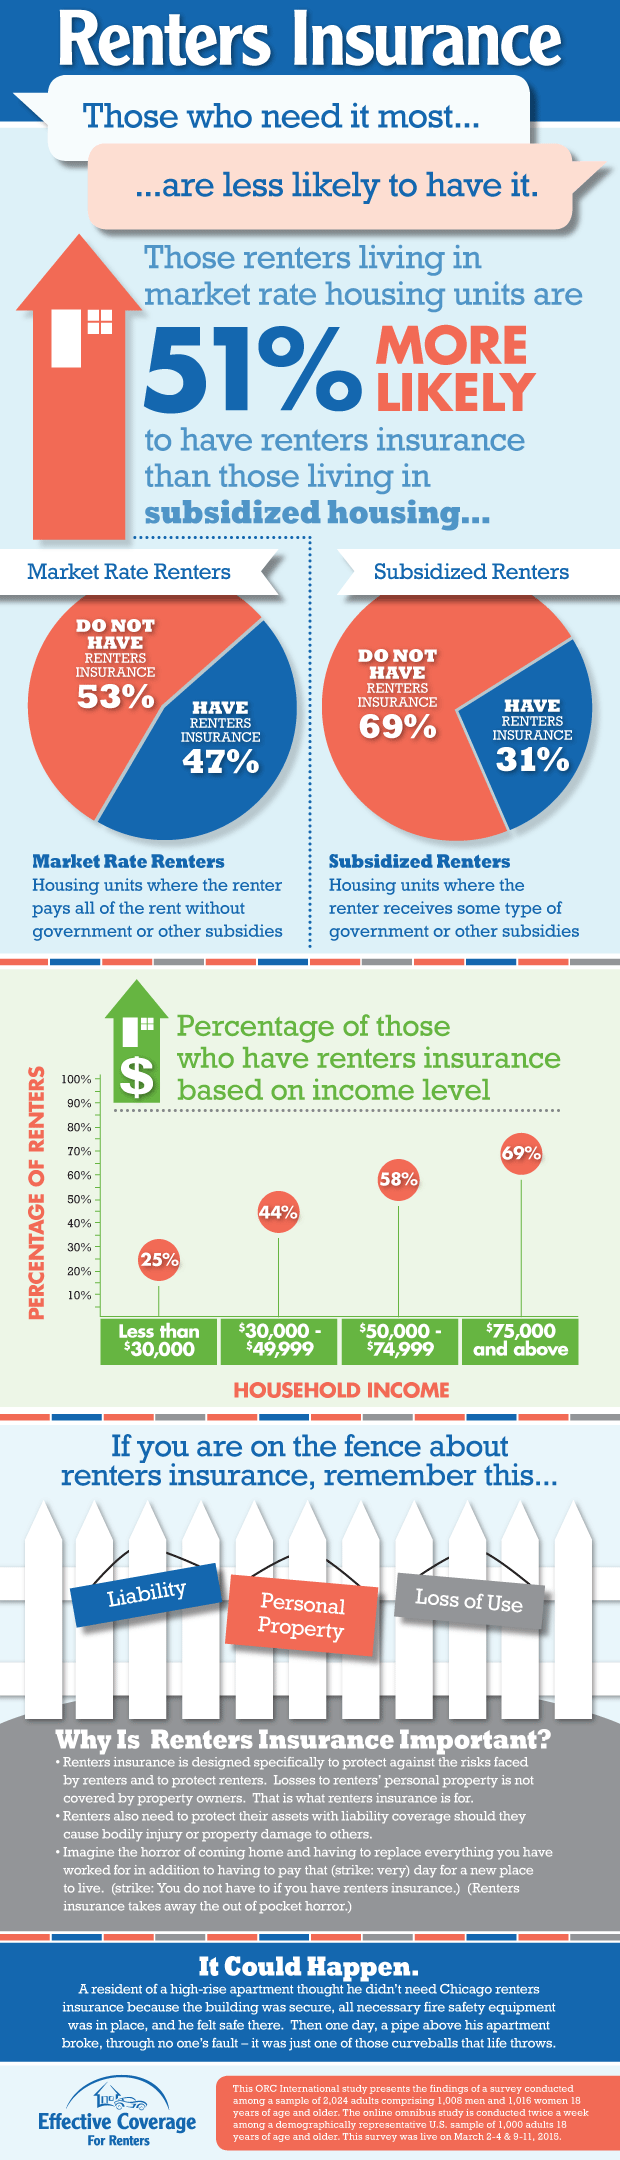 Those who need renters insurance most